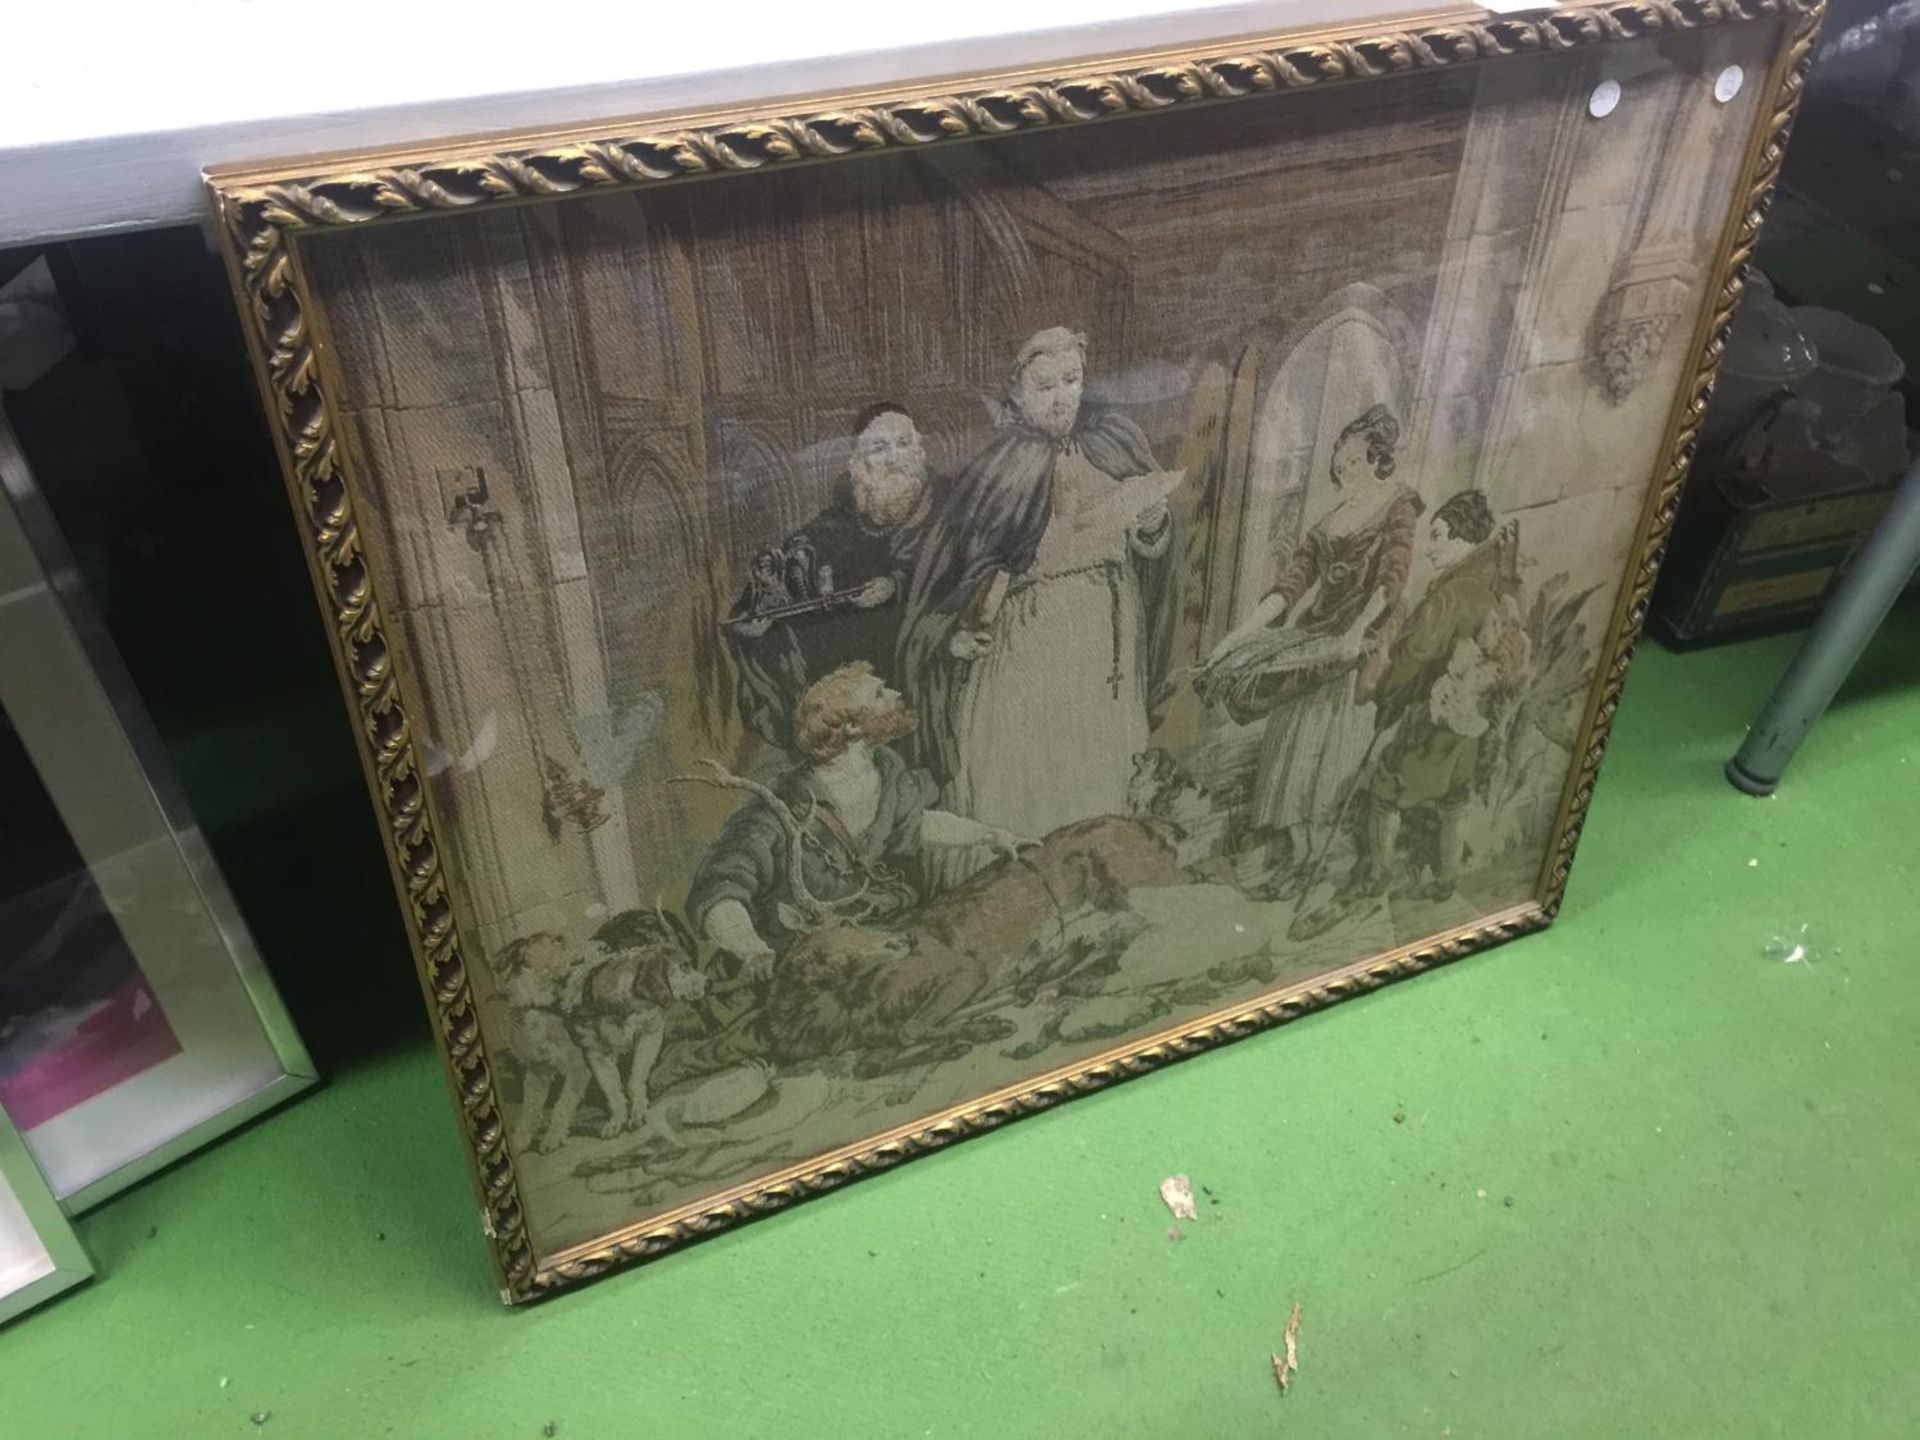 A FRAMED FINE NEEDLE TAPESTRY OF A VICTORIAN SCENE - 83 X 70 CM